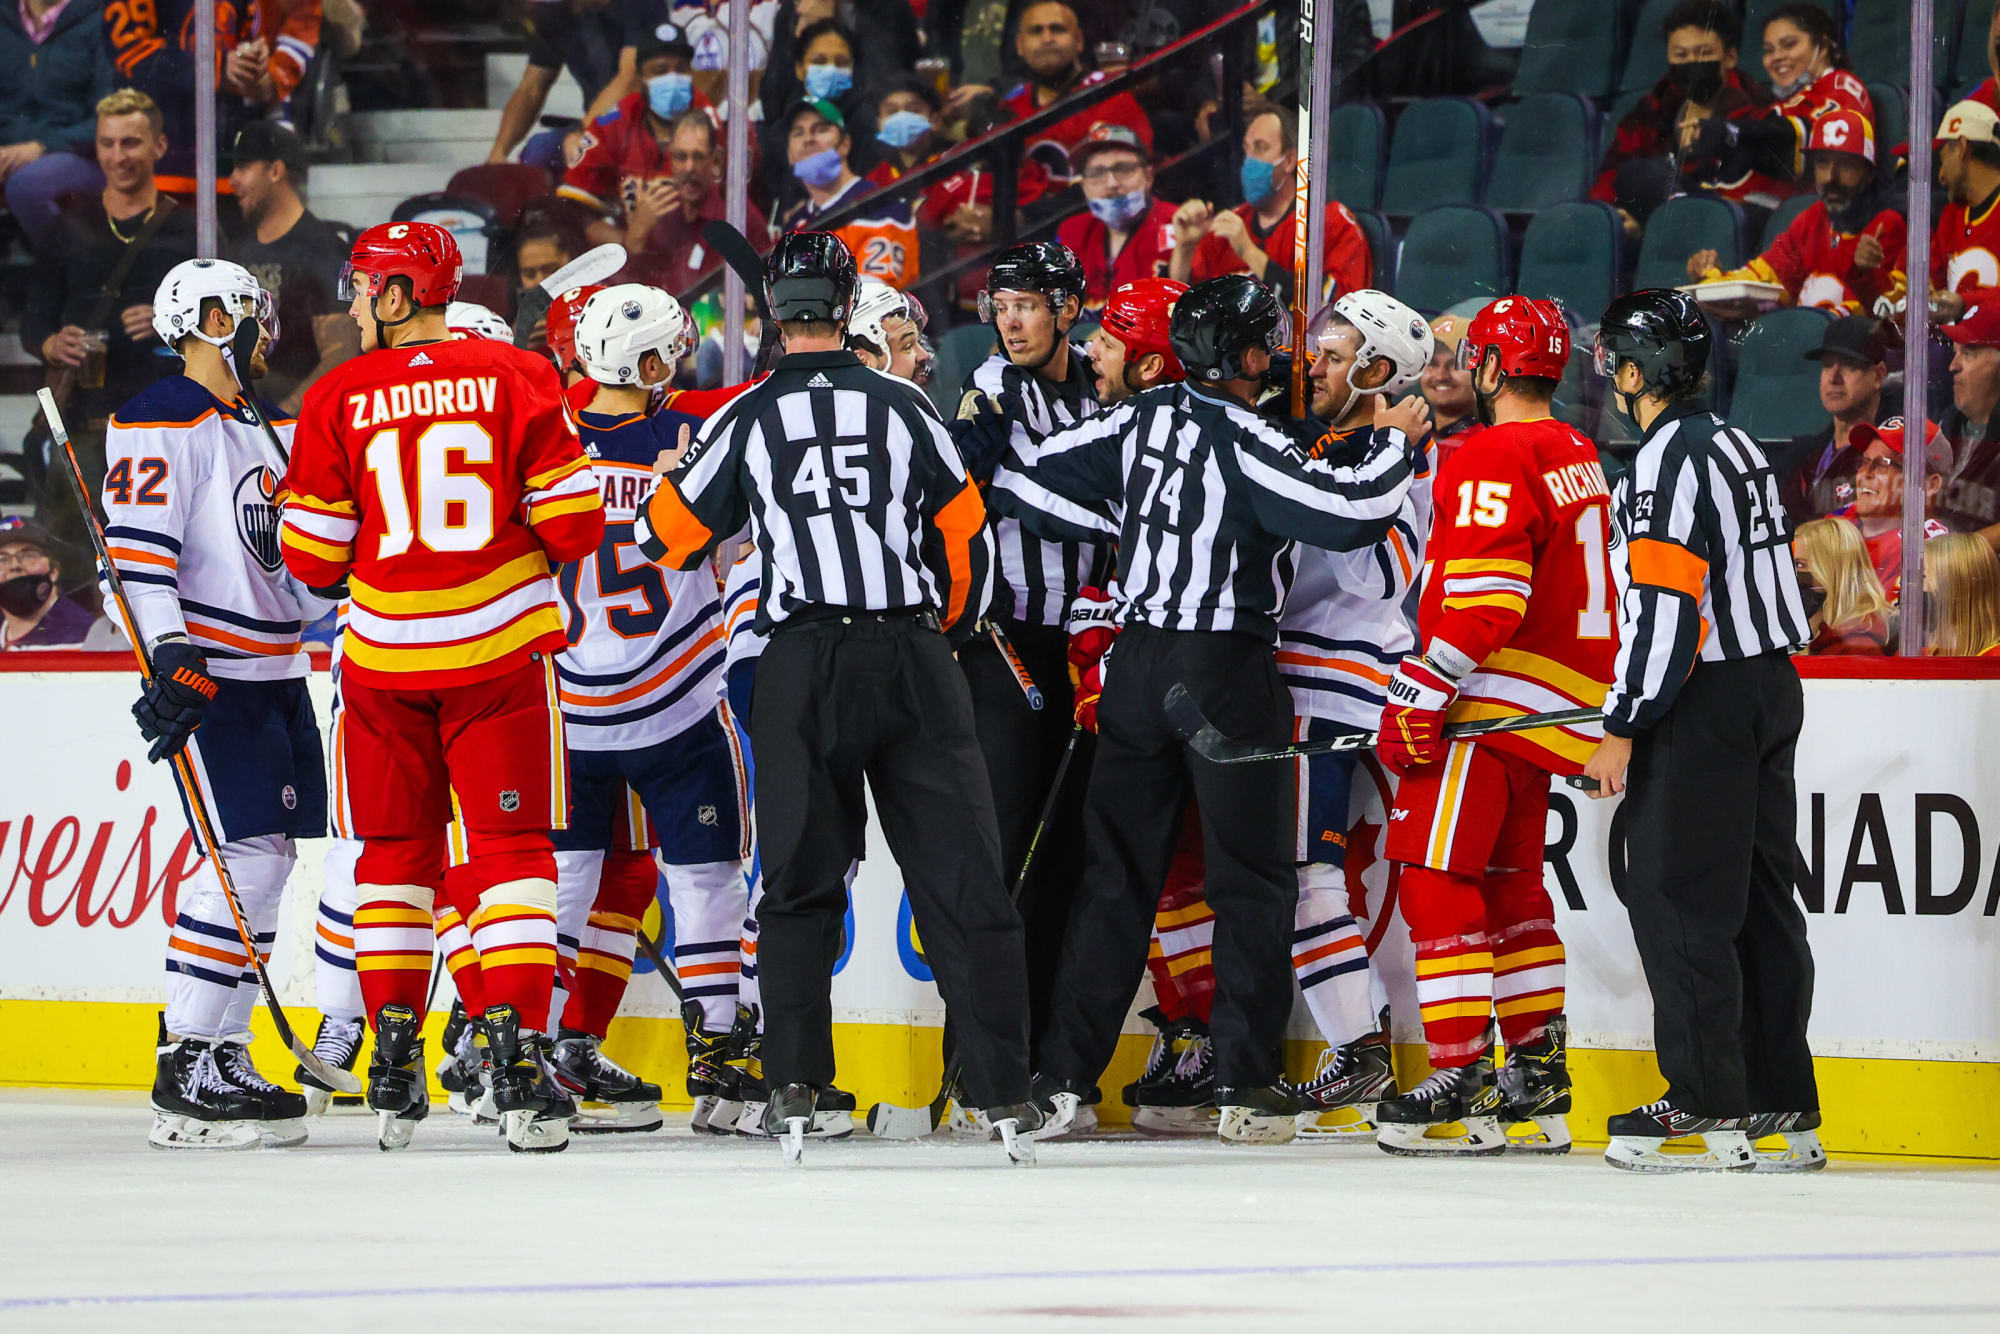 Oilers Vs Flames Date, Time, Streaming, Lineup, More